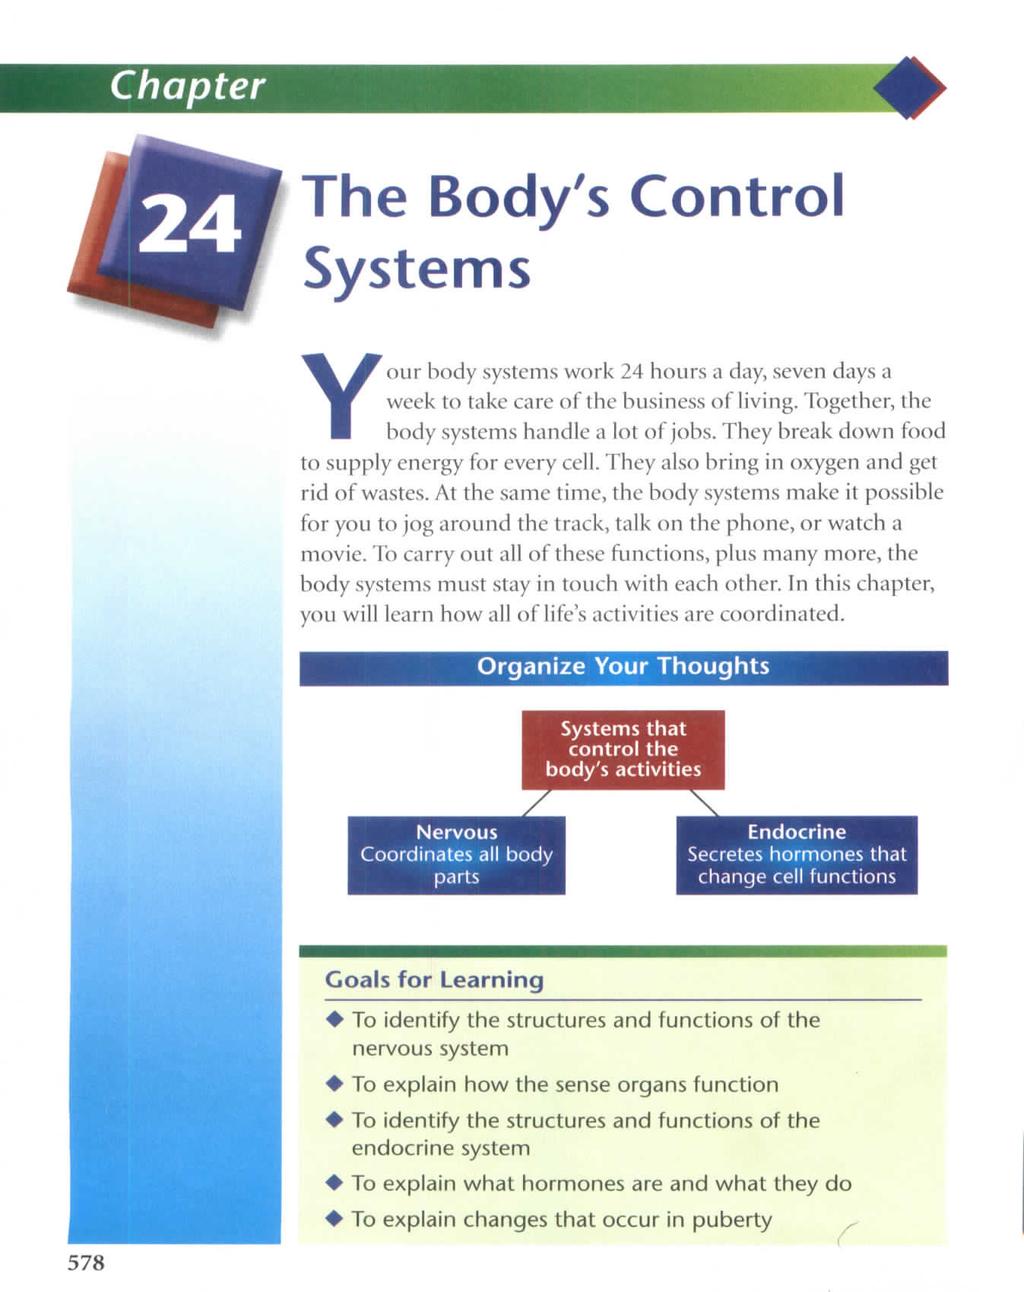 Chapter The Body's Control Systems Your body systems work 24 hours a day, seven days a week to take care of the business of living. Together, the body systems handle a lot of jobs.